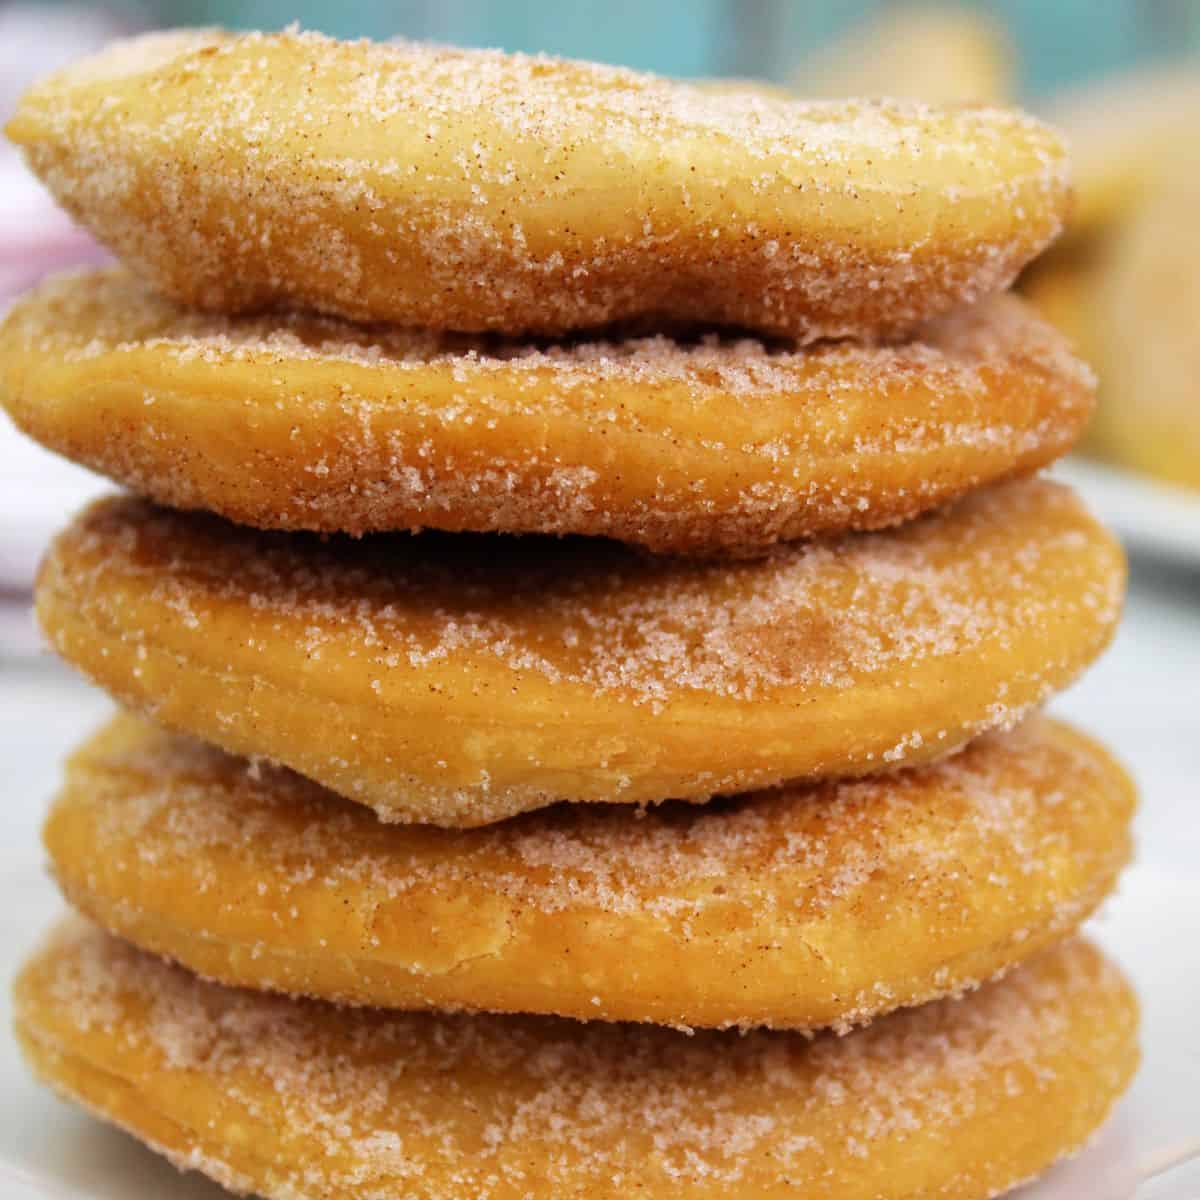 A stack of bunuelos on a plate.